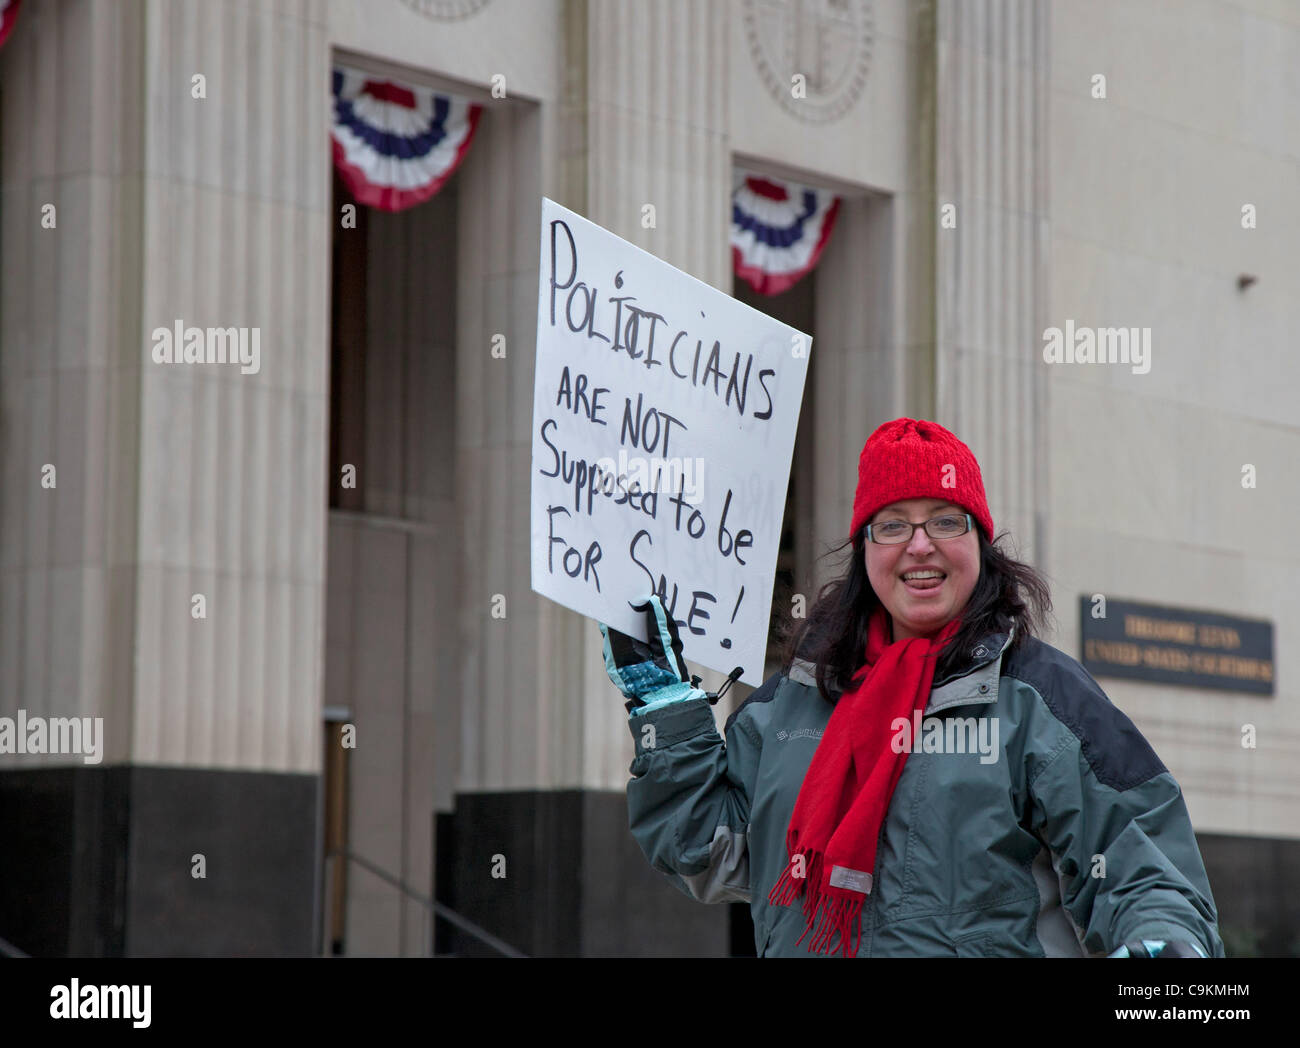 Detroit, Michigan - Activists mark the second anniversary of the Supreme Court's 'Citizens United' decision by picketing the federal courthouse. 'Citizens United' opened the way for corporations to make unlimited contributions to support or oppose political candidates. Stock Photo